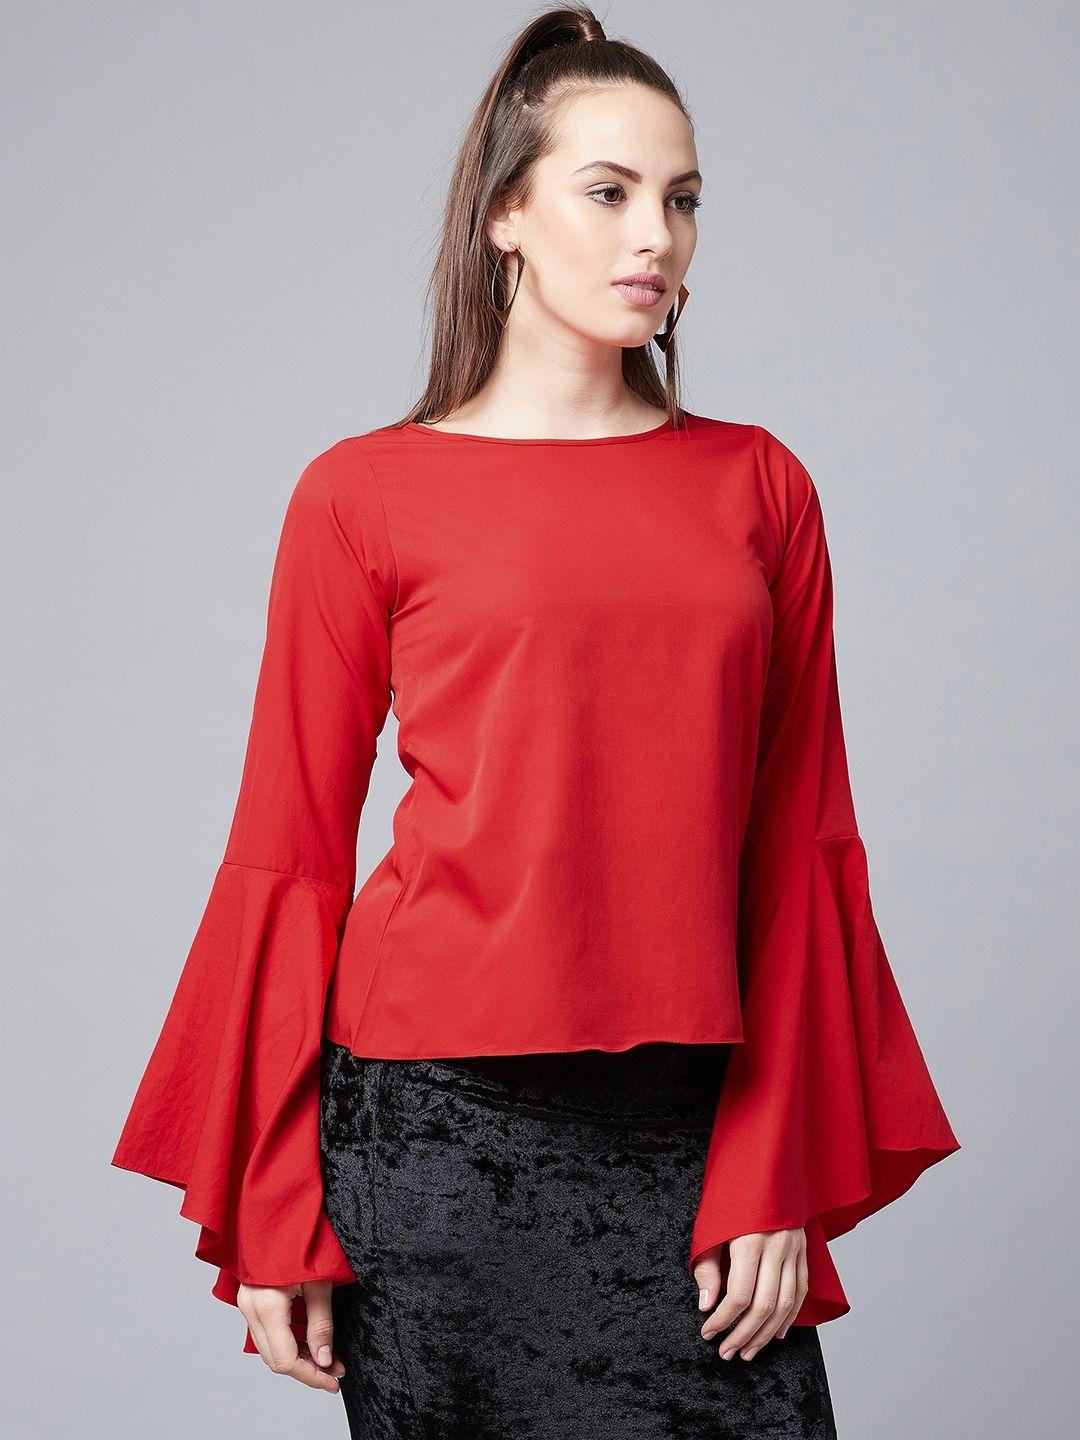 athena-women-red-solid-top